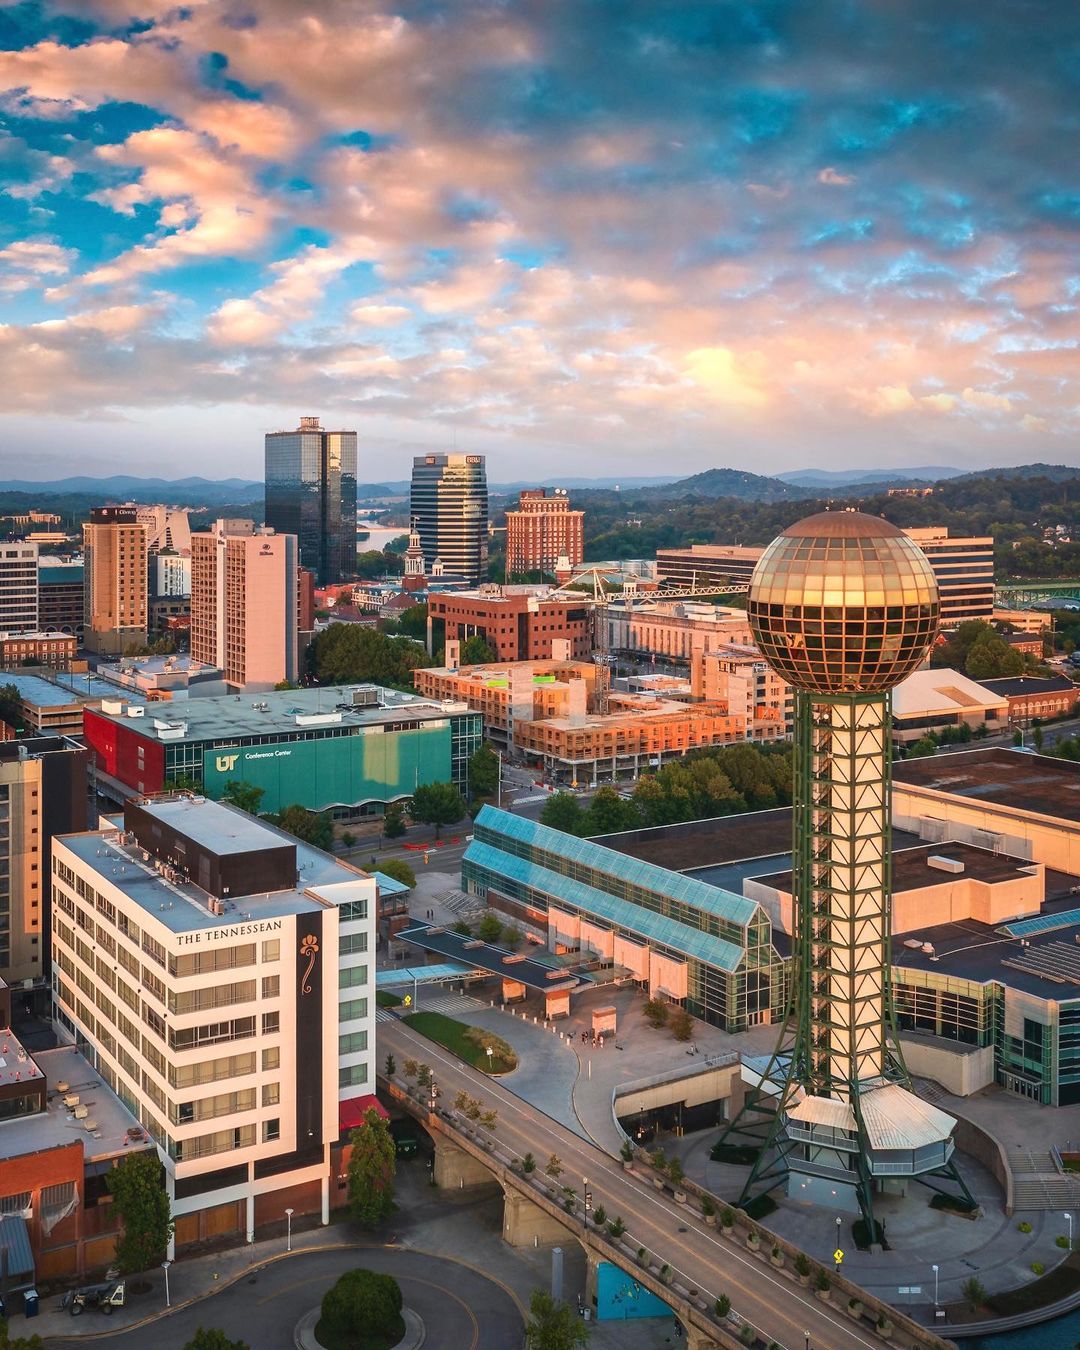 Downtown Knoxville at Dusk. Photo by Instagram user @nickmorganphotos